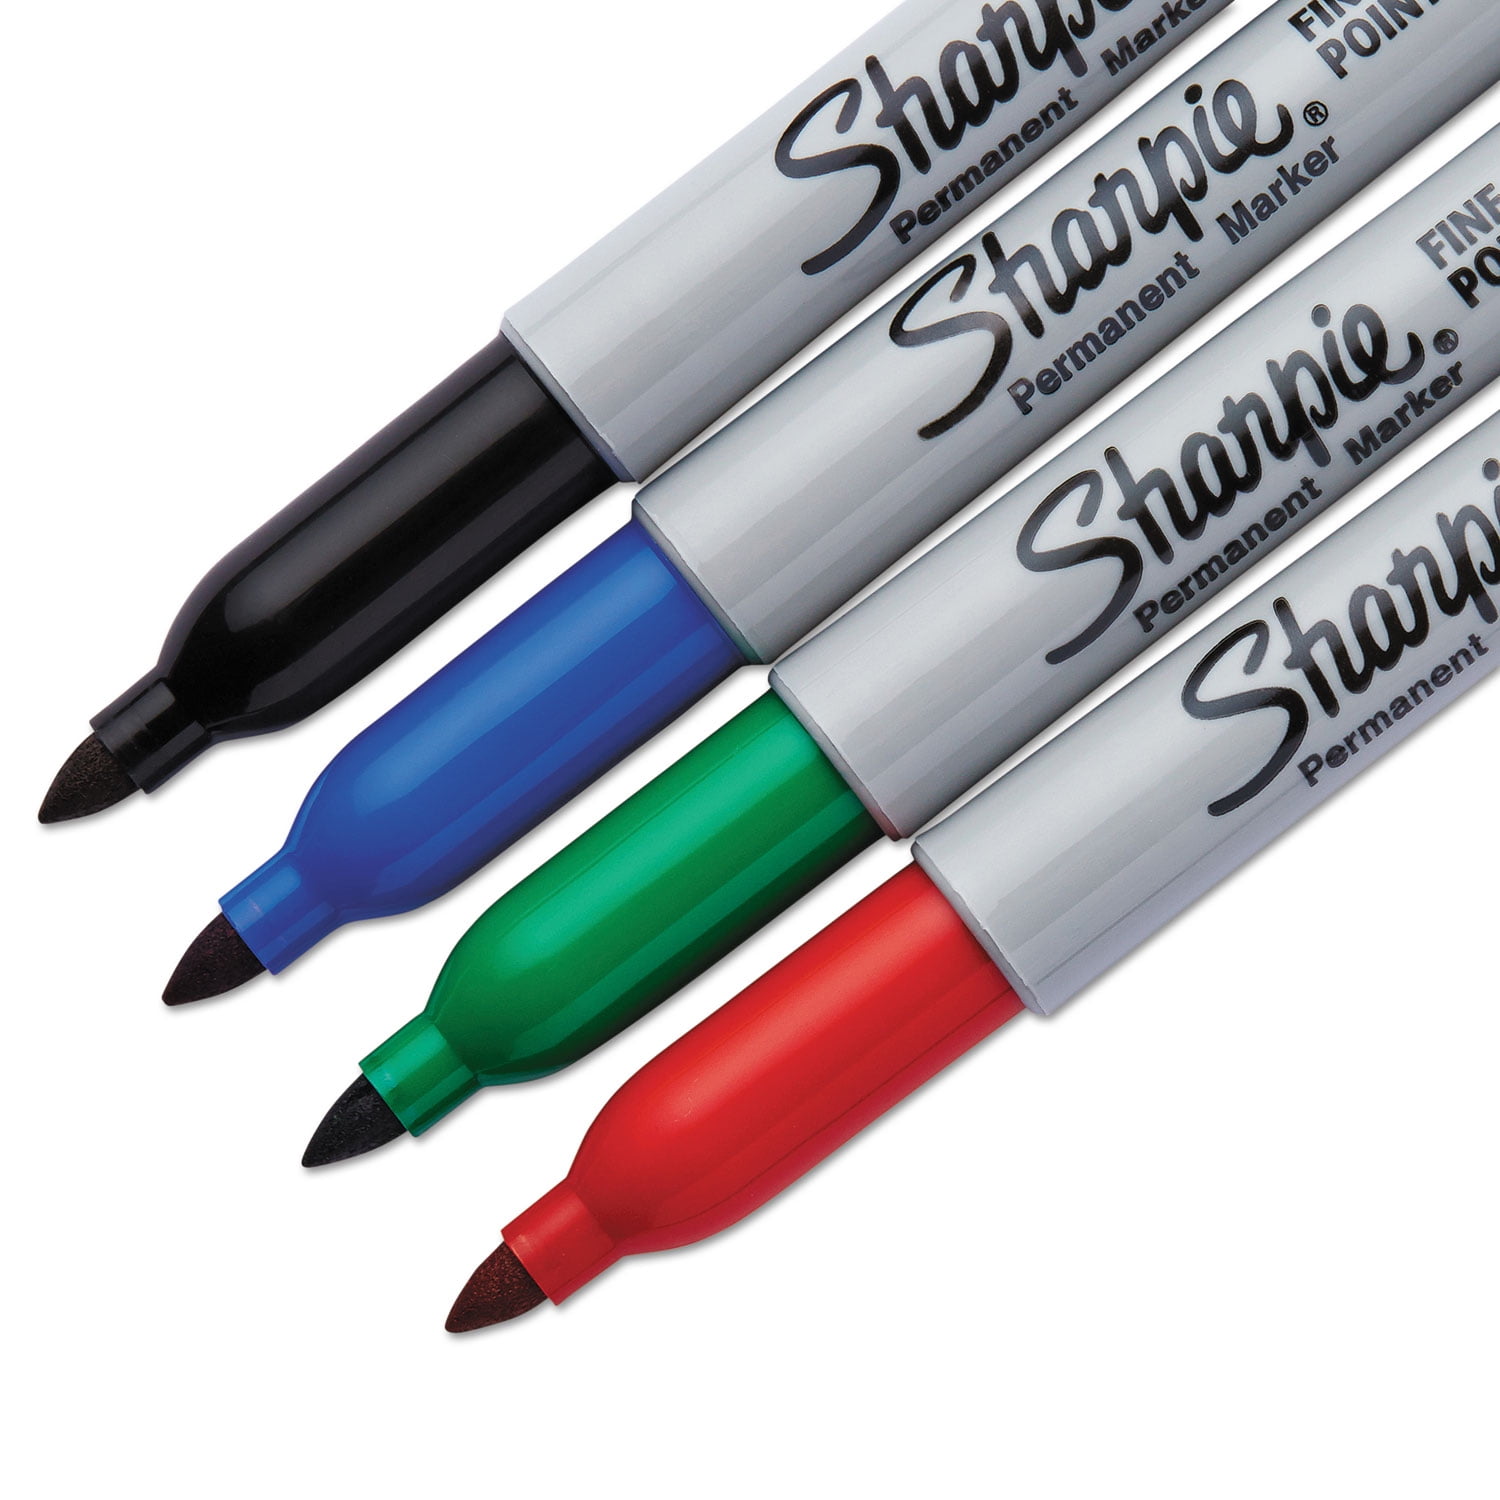 Permanent Markers Set with 18 Assorted Vibrant Colors - 36 Fine